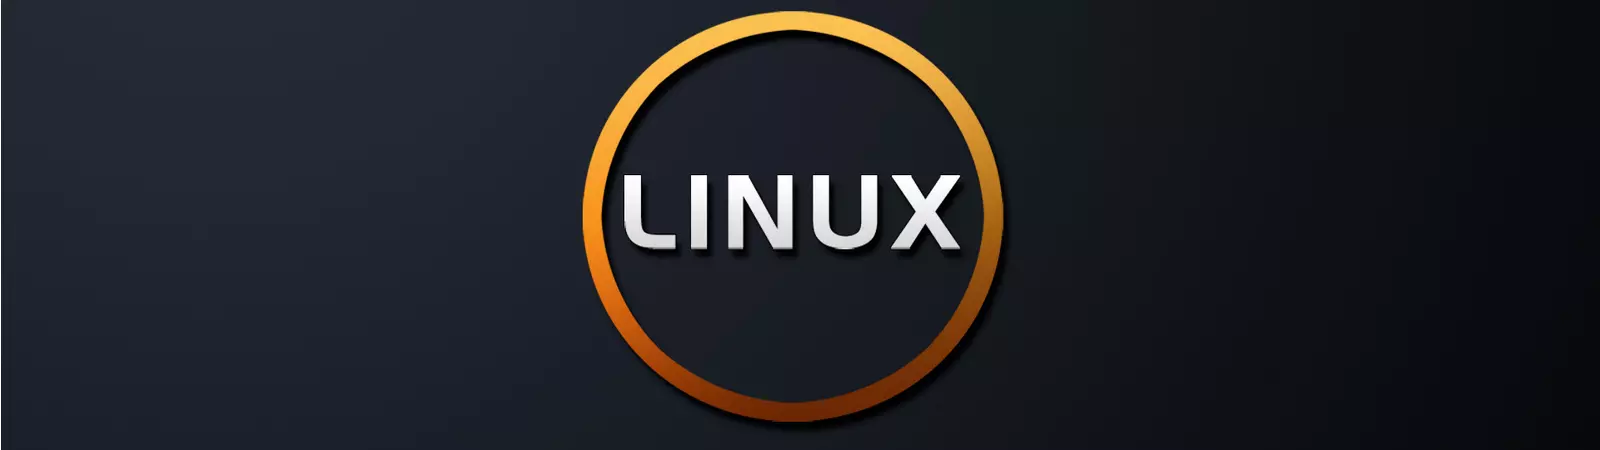 linux_category_eng